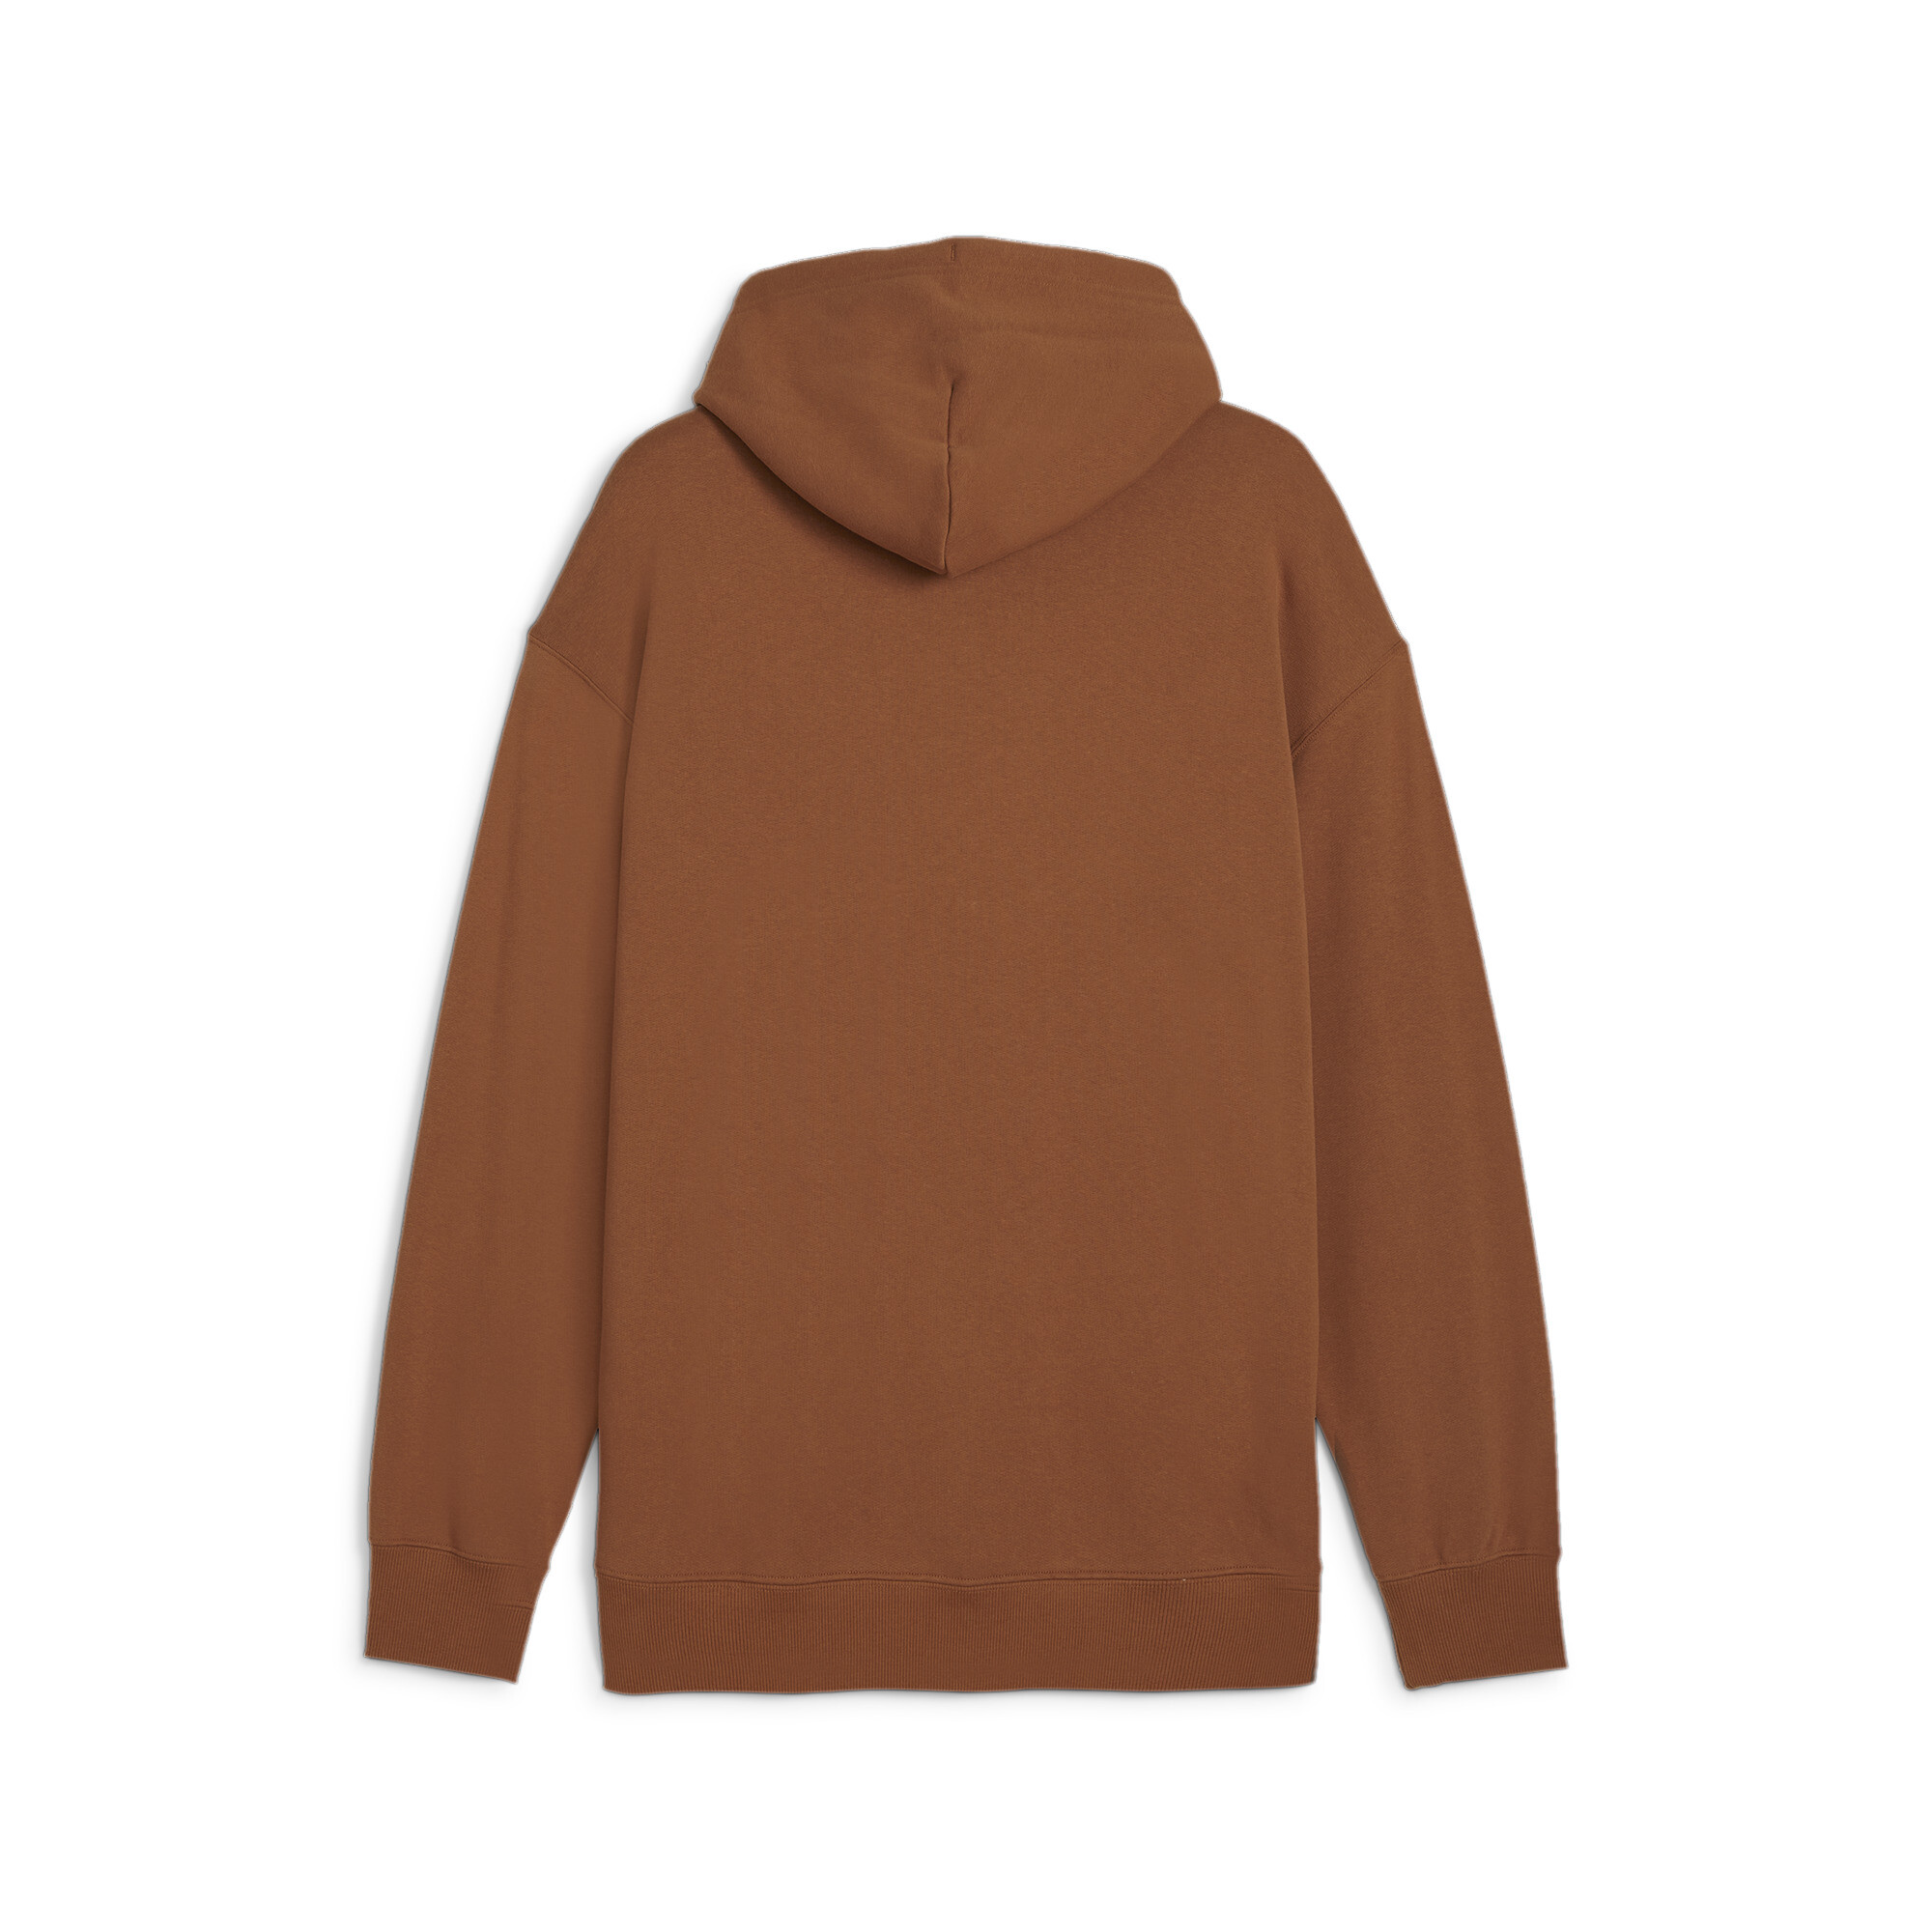 Puma BETTER CLASSICS Hoodie, Brown, Size M, Clothing